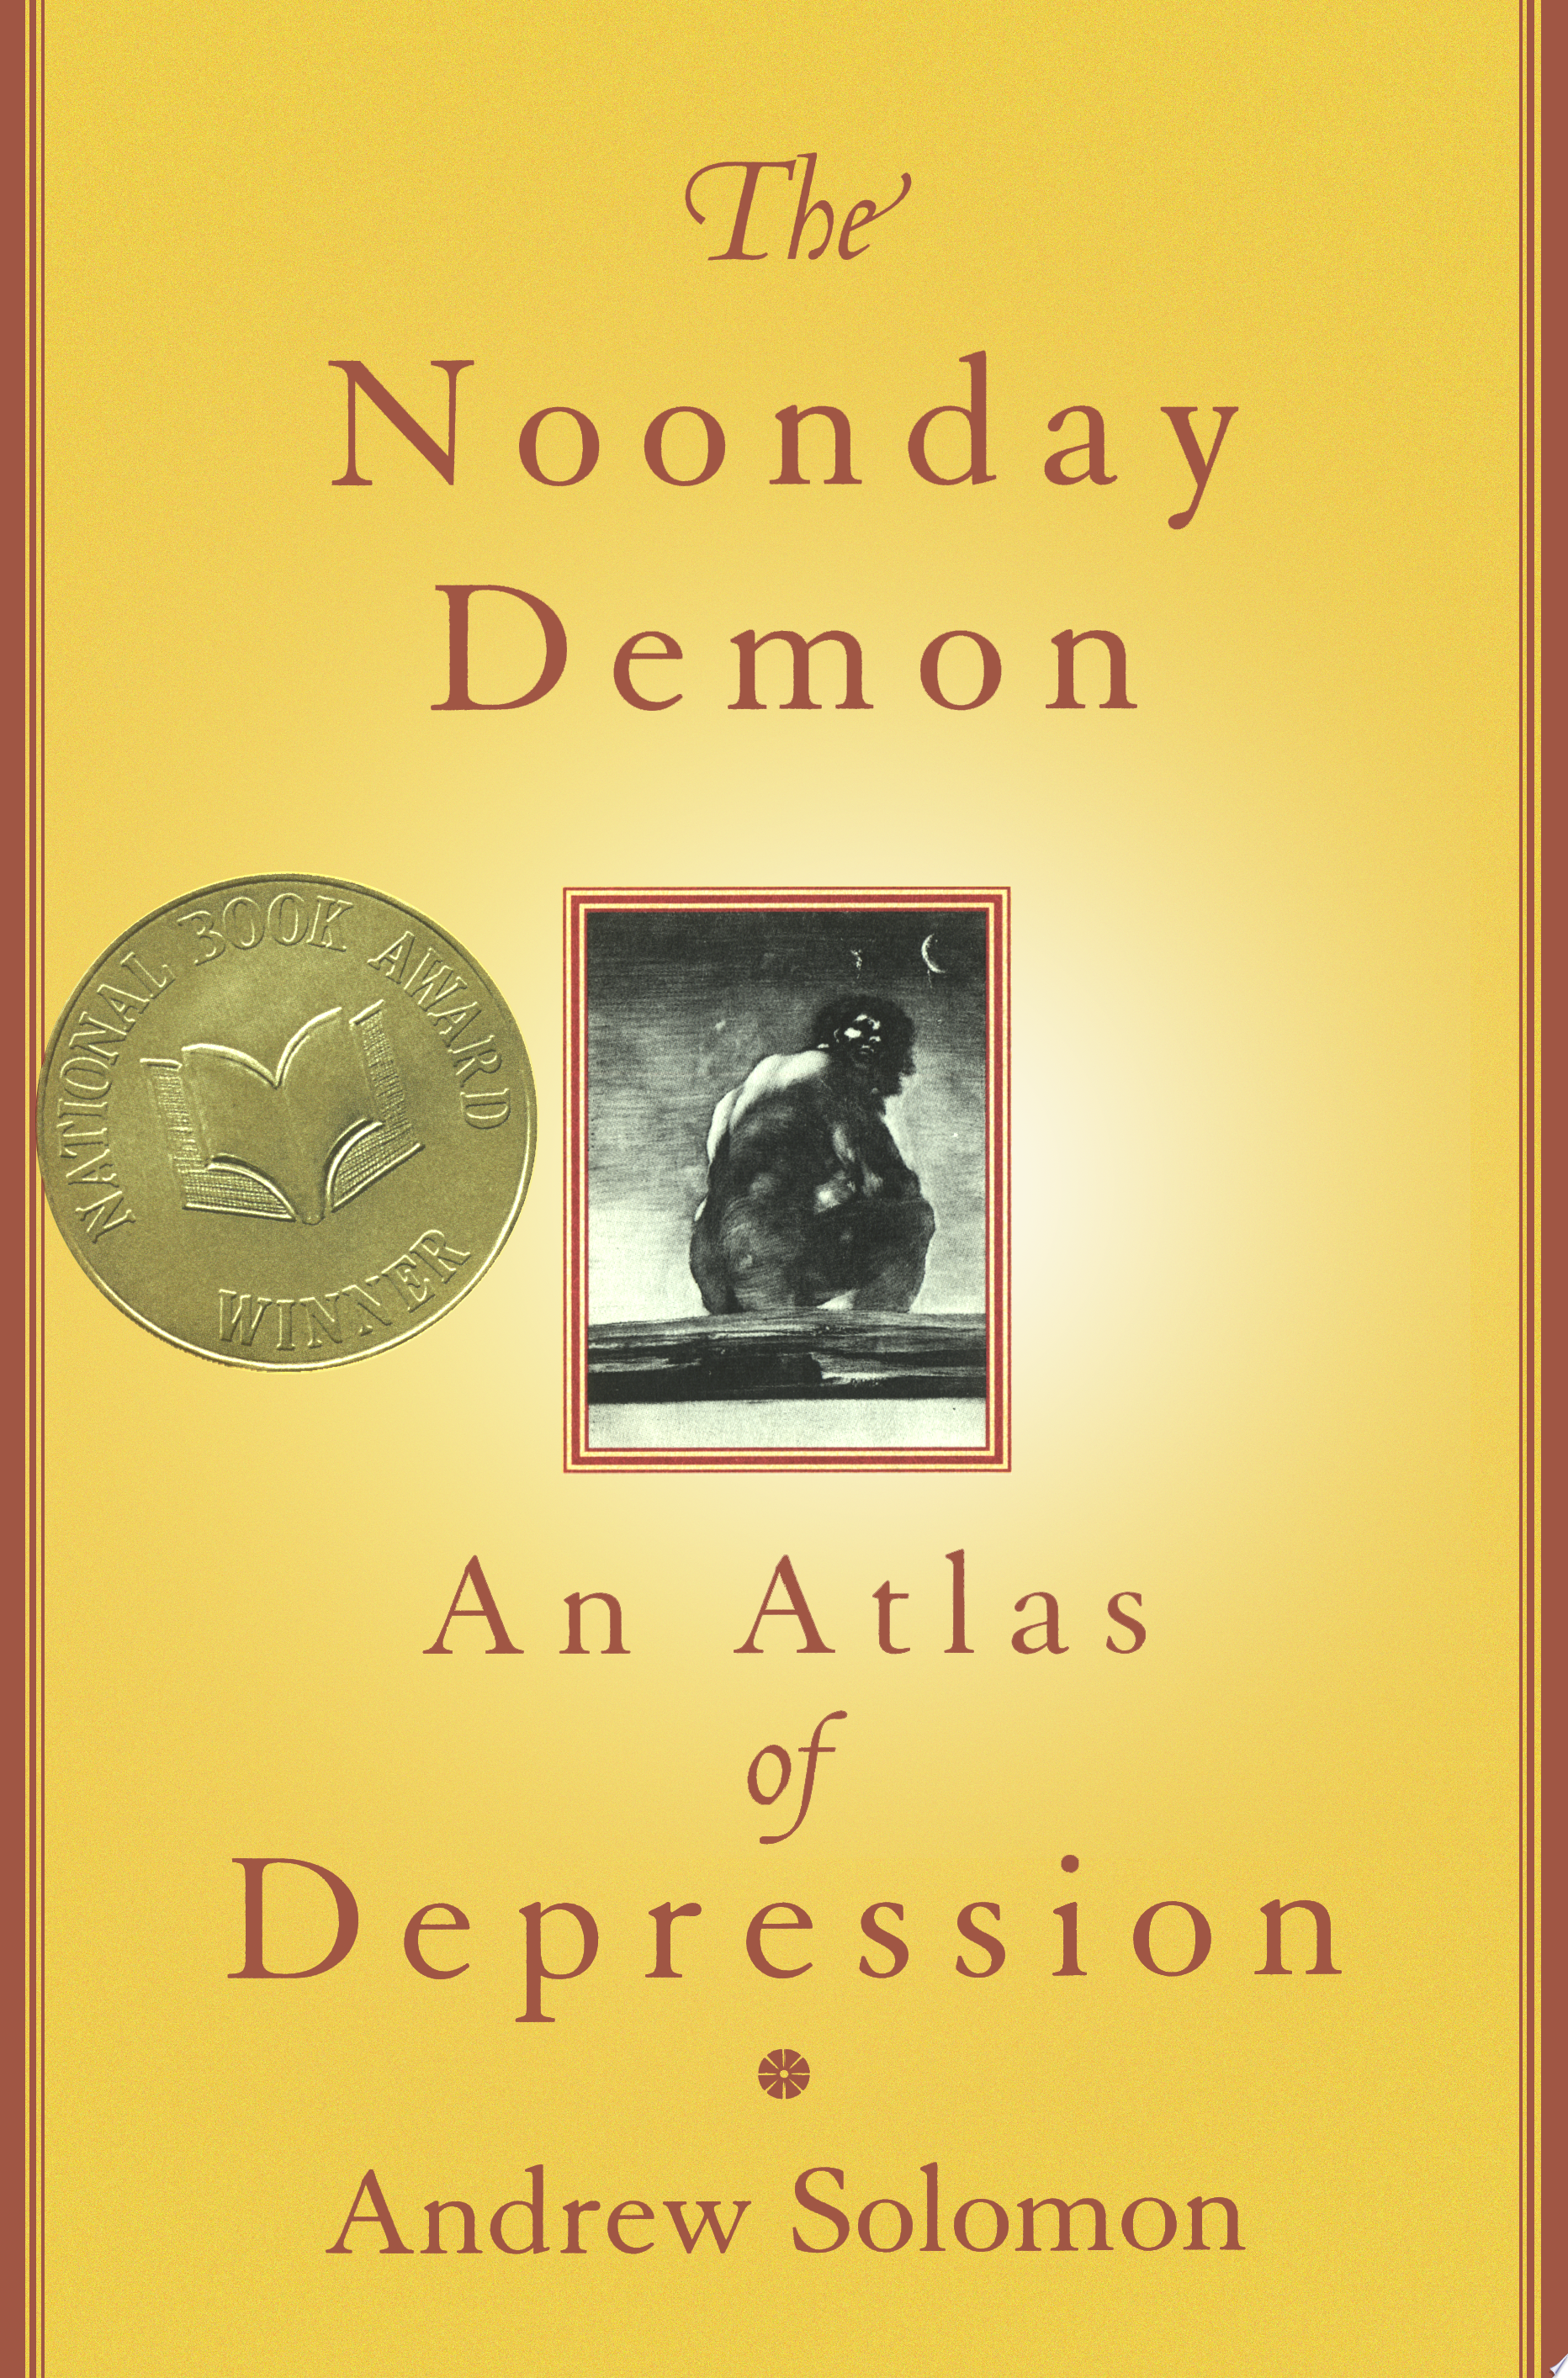 Image for "The Noonday Demon"